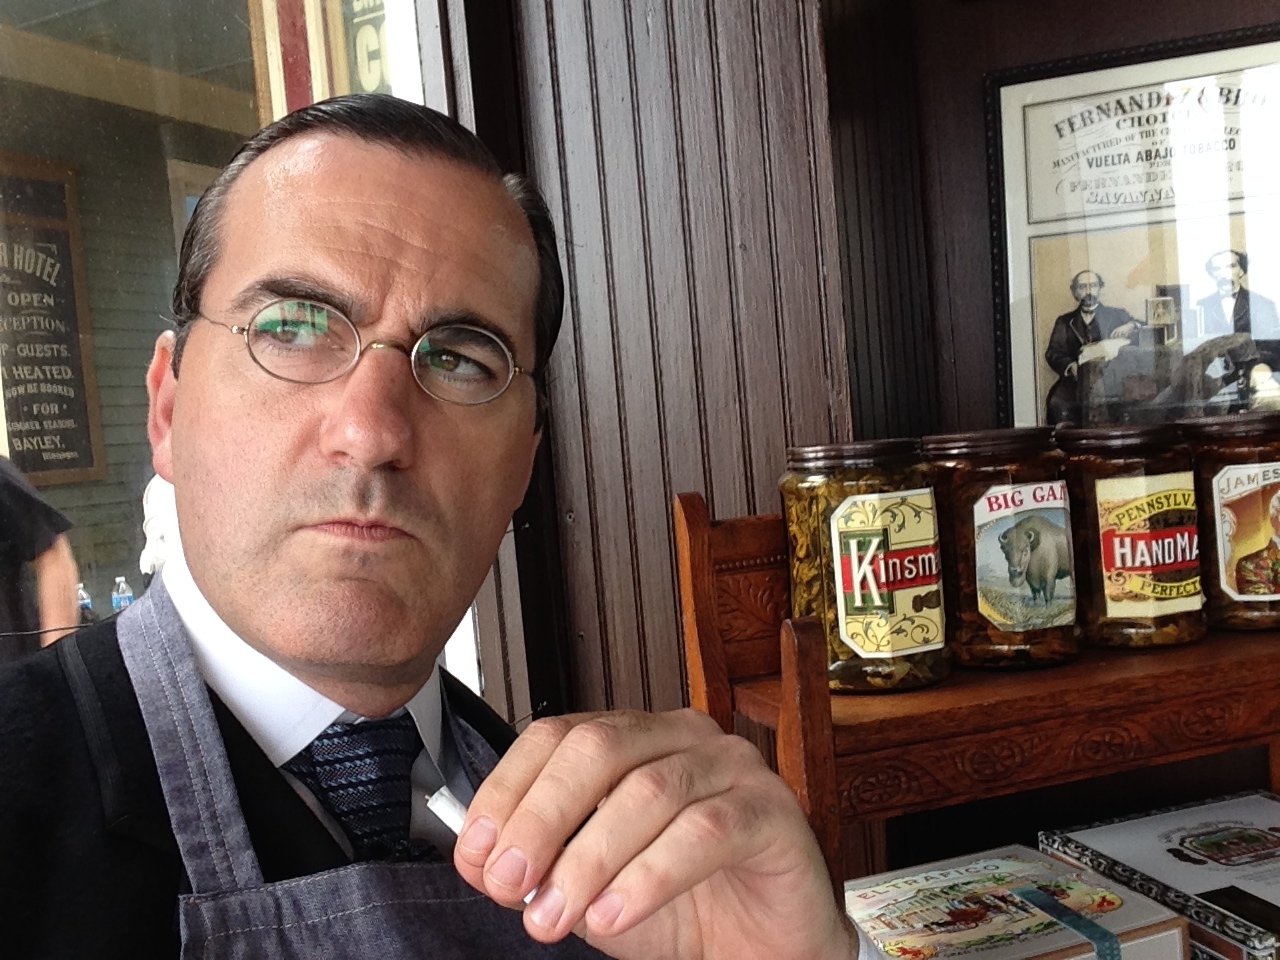 On the set of Boardwalk Empire.